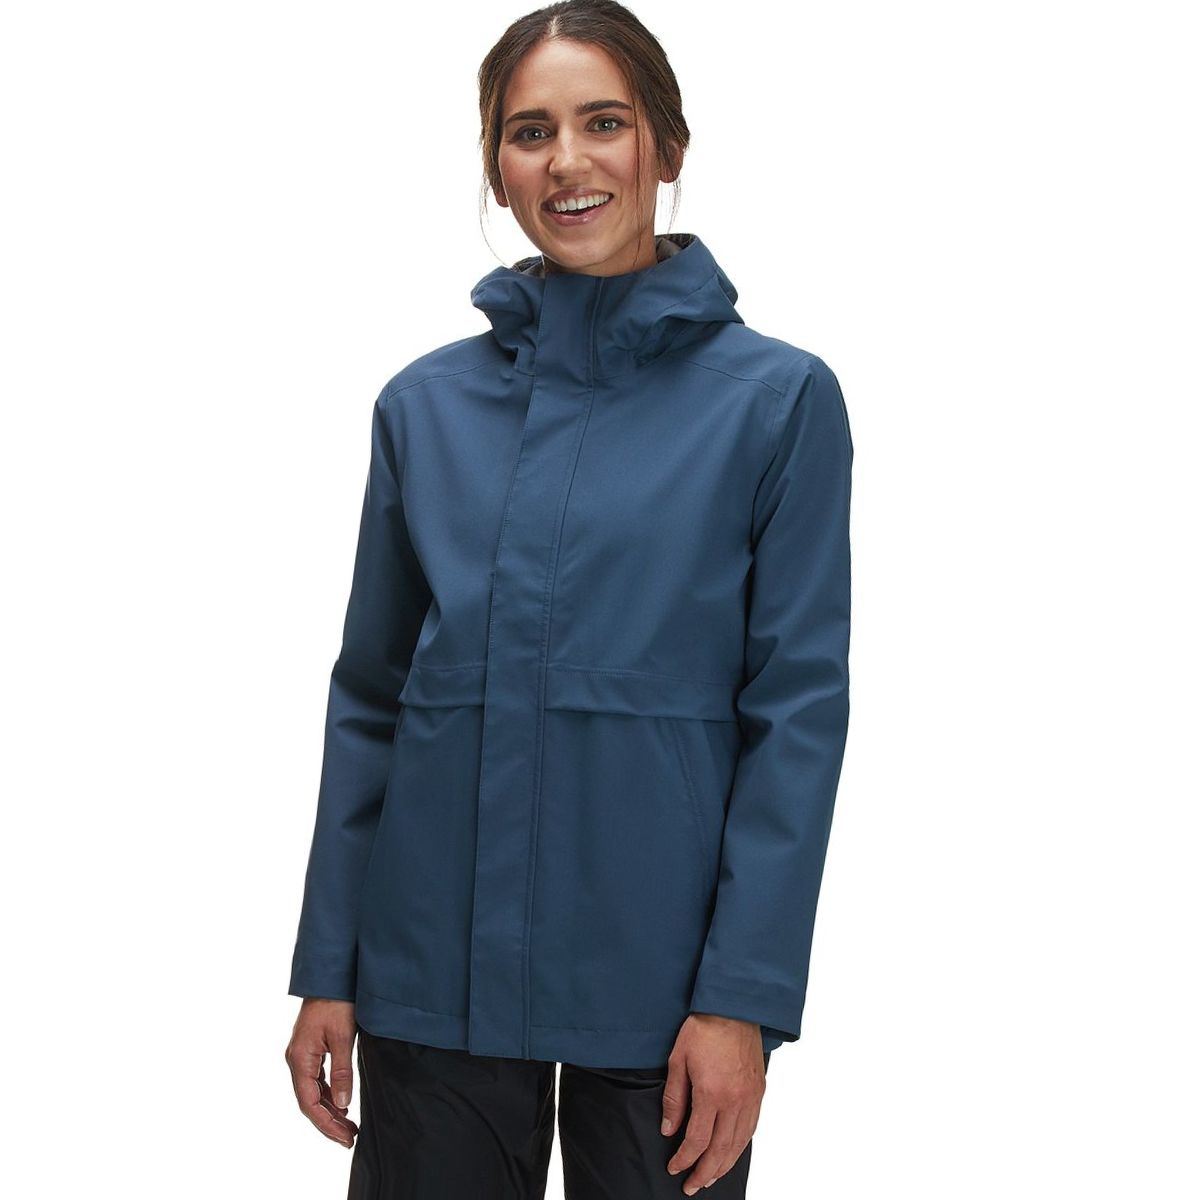 Patagonia Cloud Country Jacket - Women's